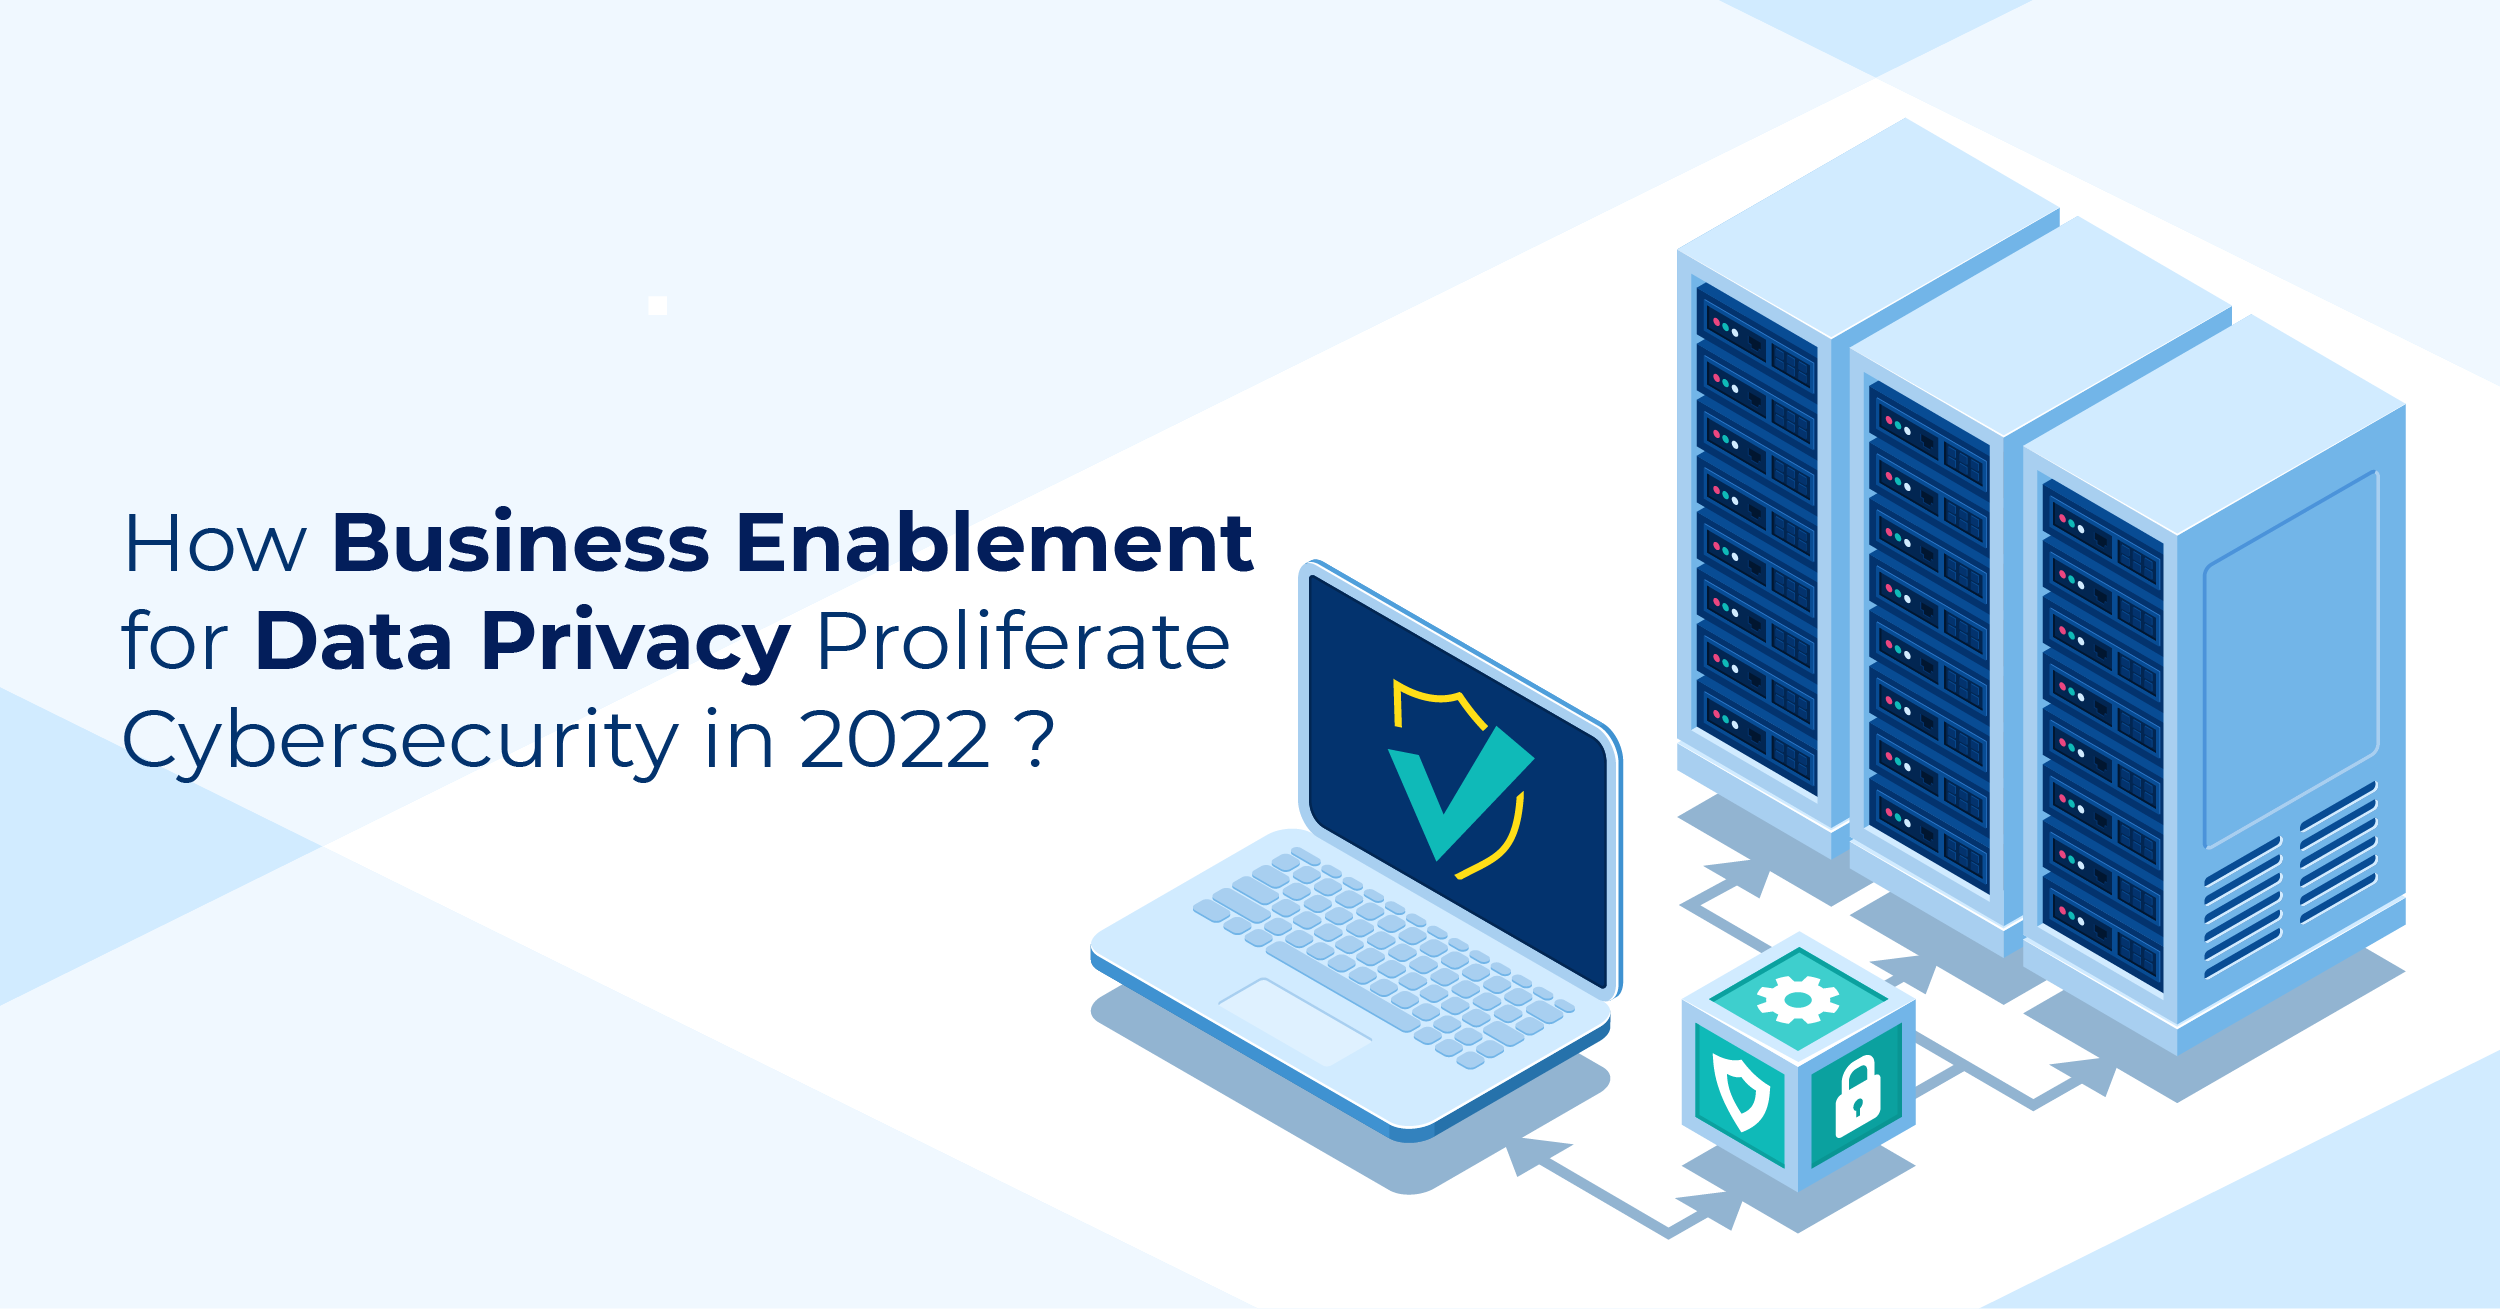 How Business Enablement for Data Privacy Would Proliferate Cybersecurity in 2022?